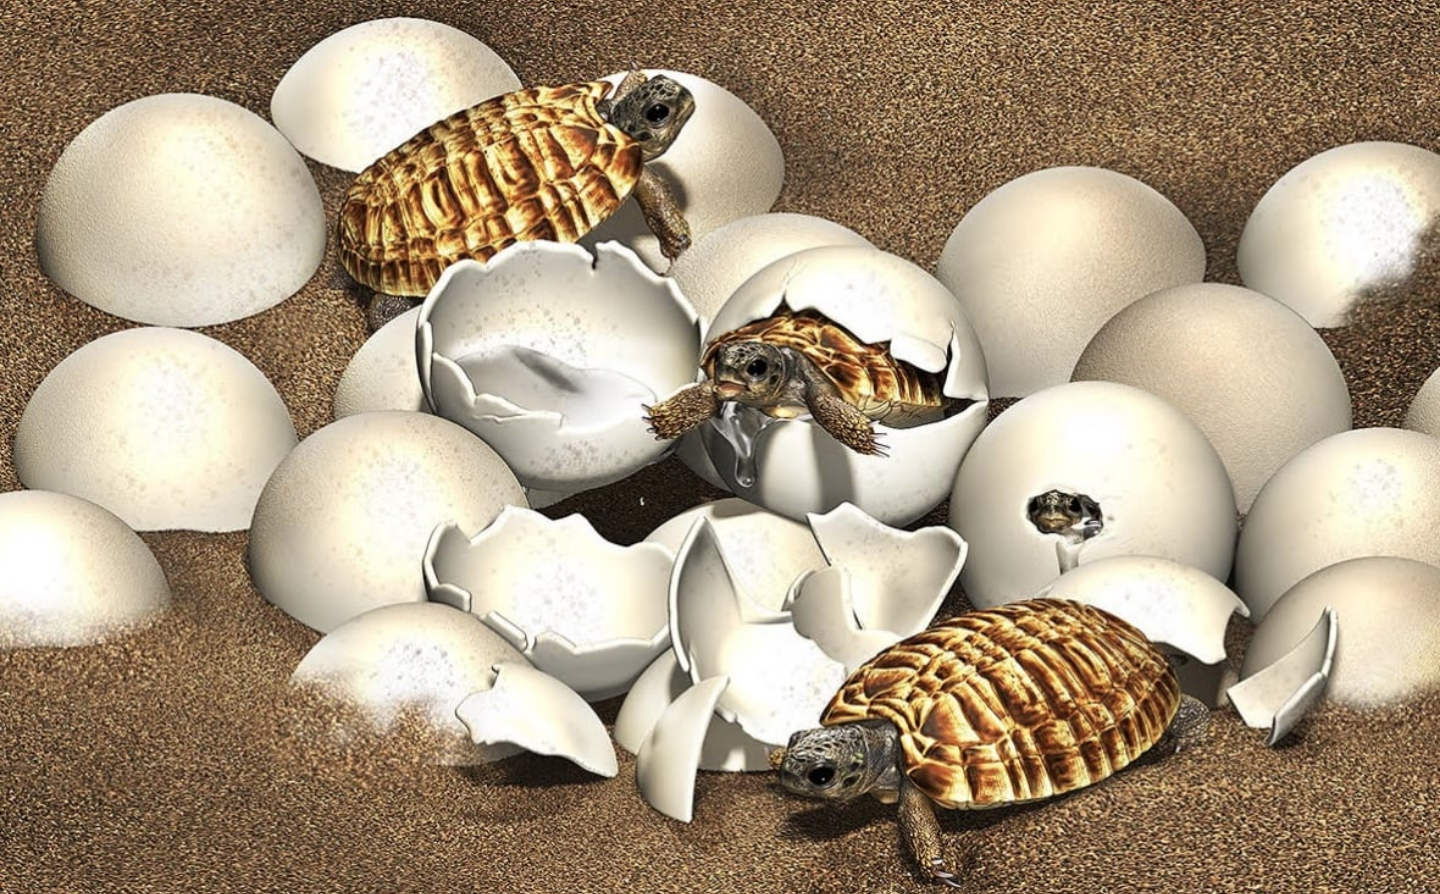 This artist's impression shows baby nanhsiungchelyid turtles hatching from their eggs. The fossil with the embryo allowed researchers to identify identical eggs in other nests, showing that they typically were laid in clutches of 15 to 30. (Masato Hattori)